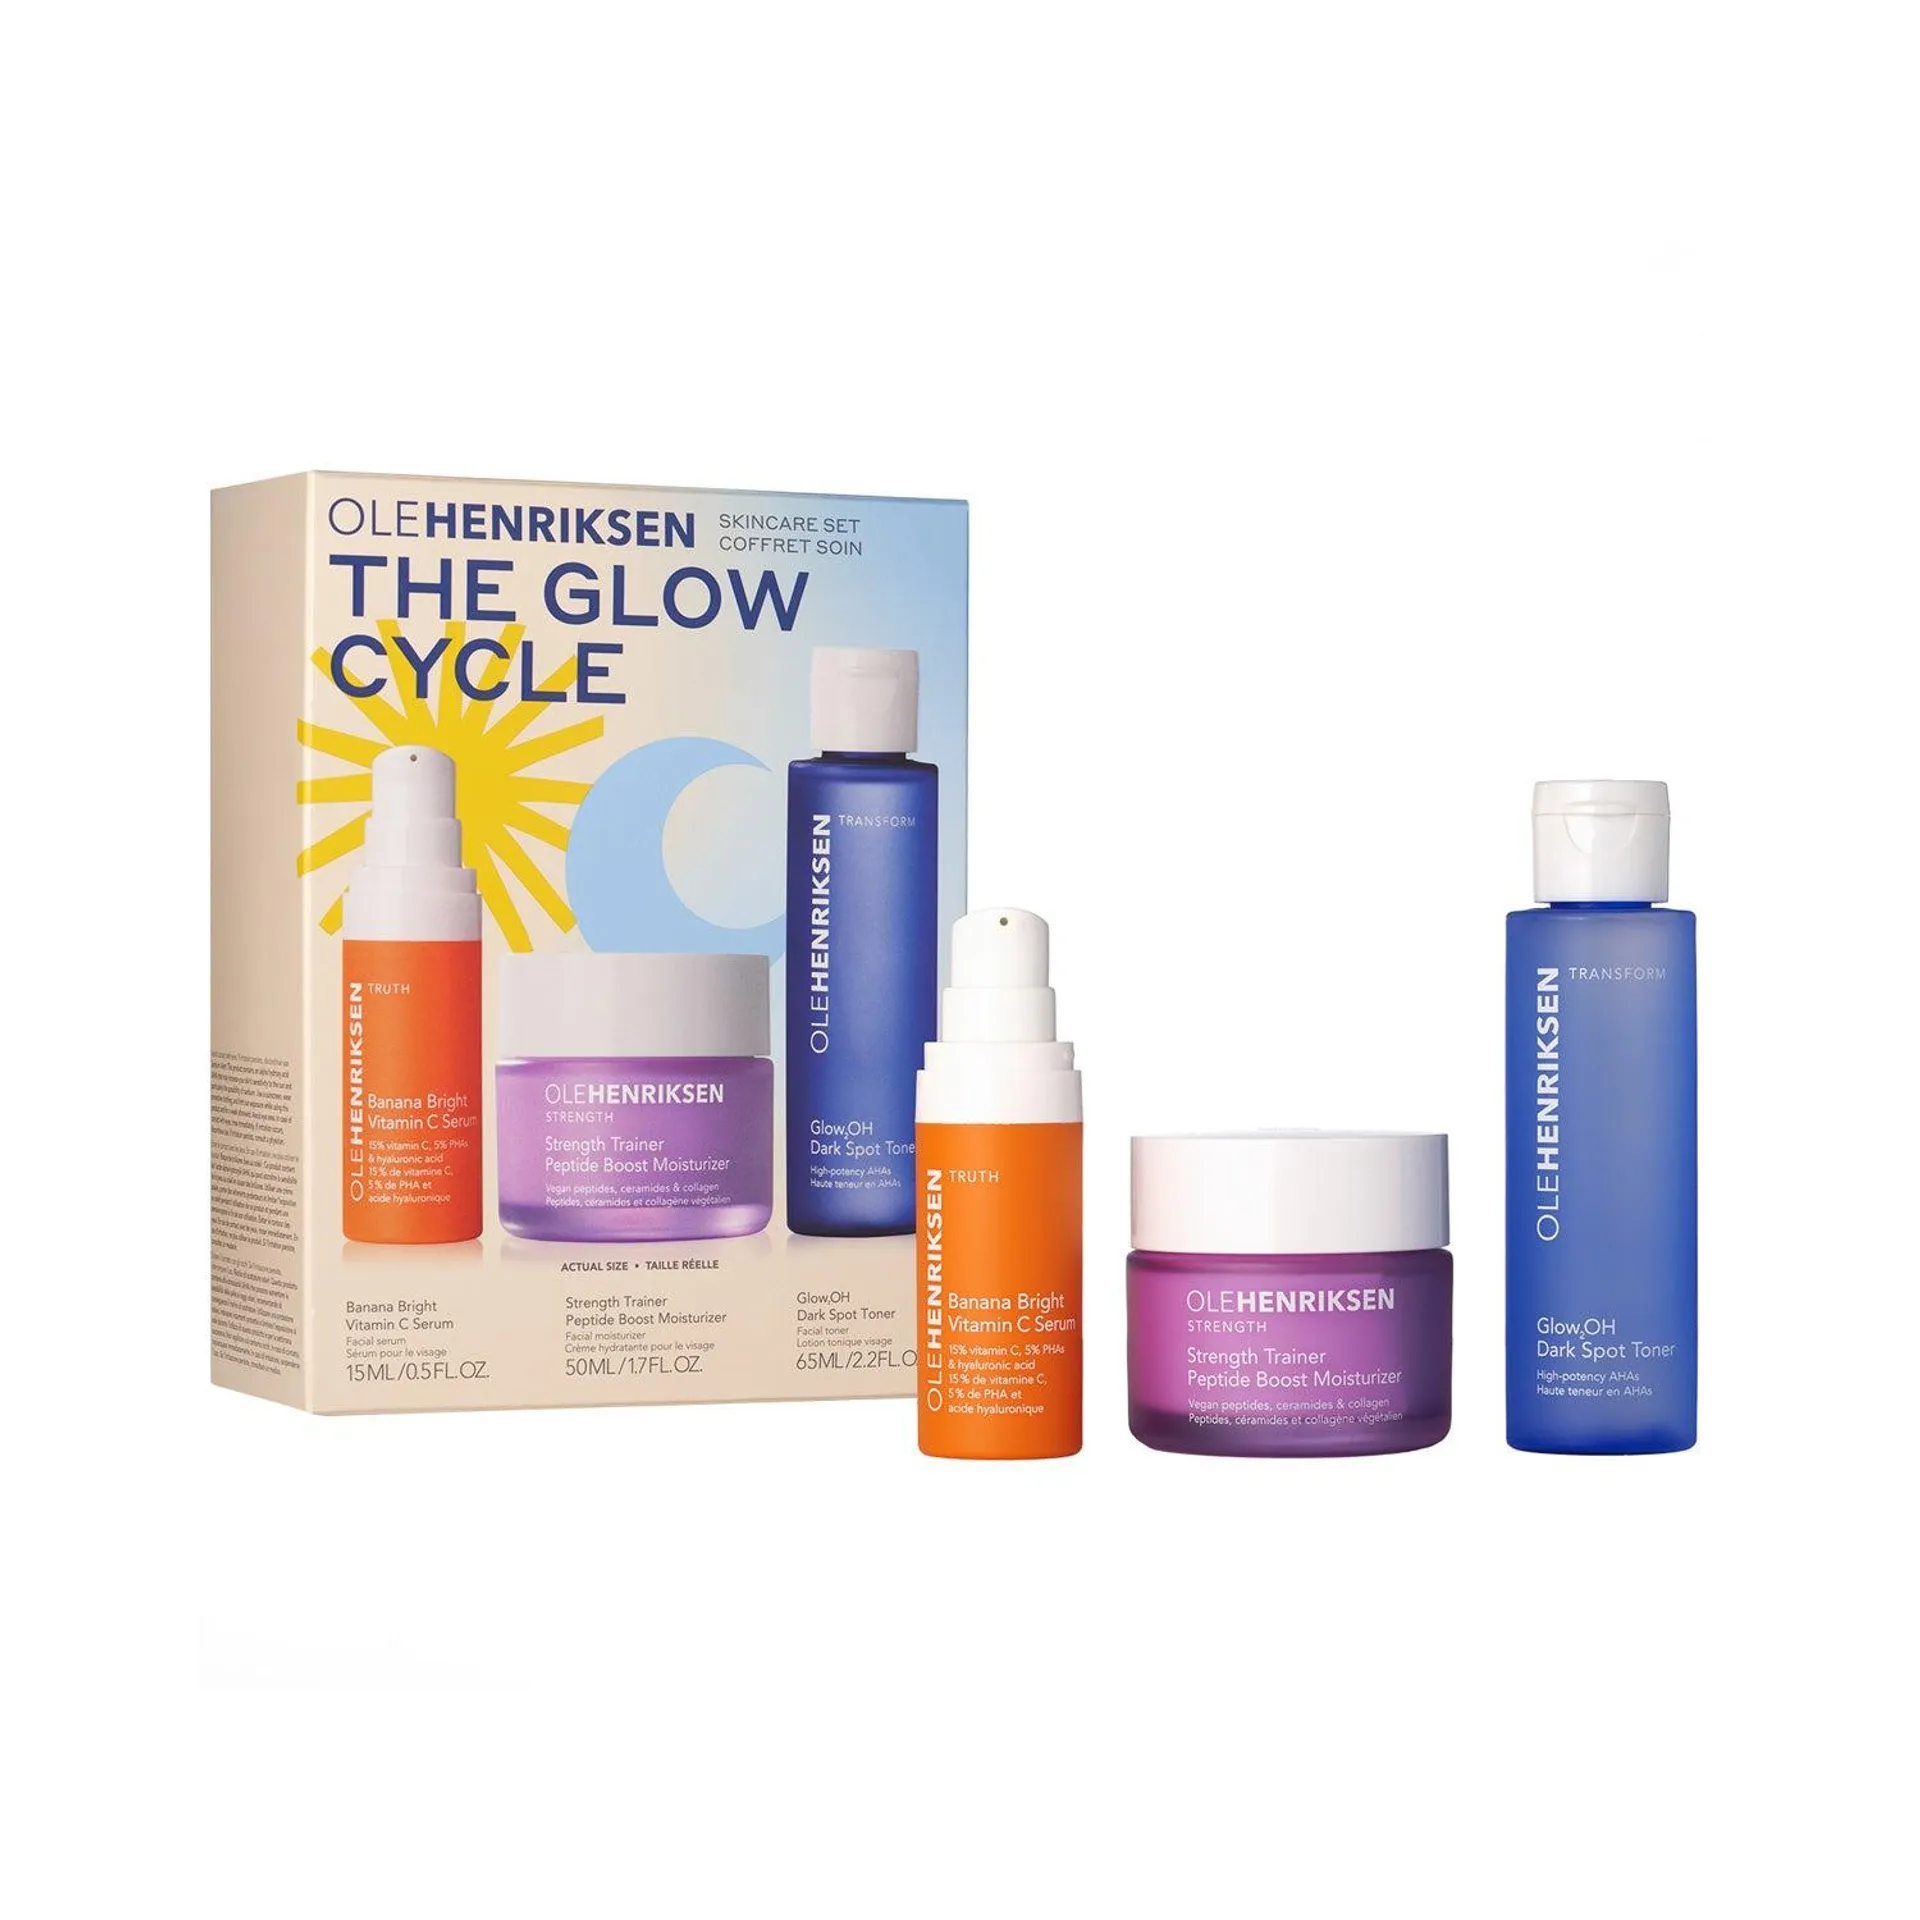 The Glow Cycle